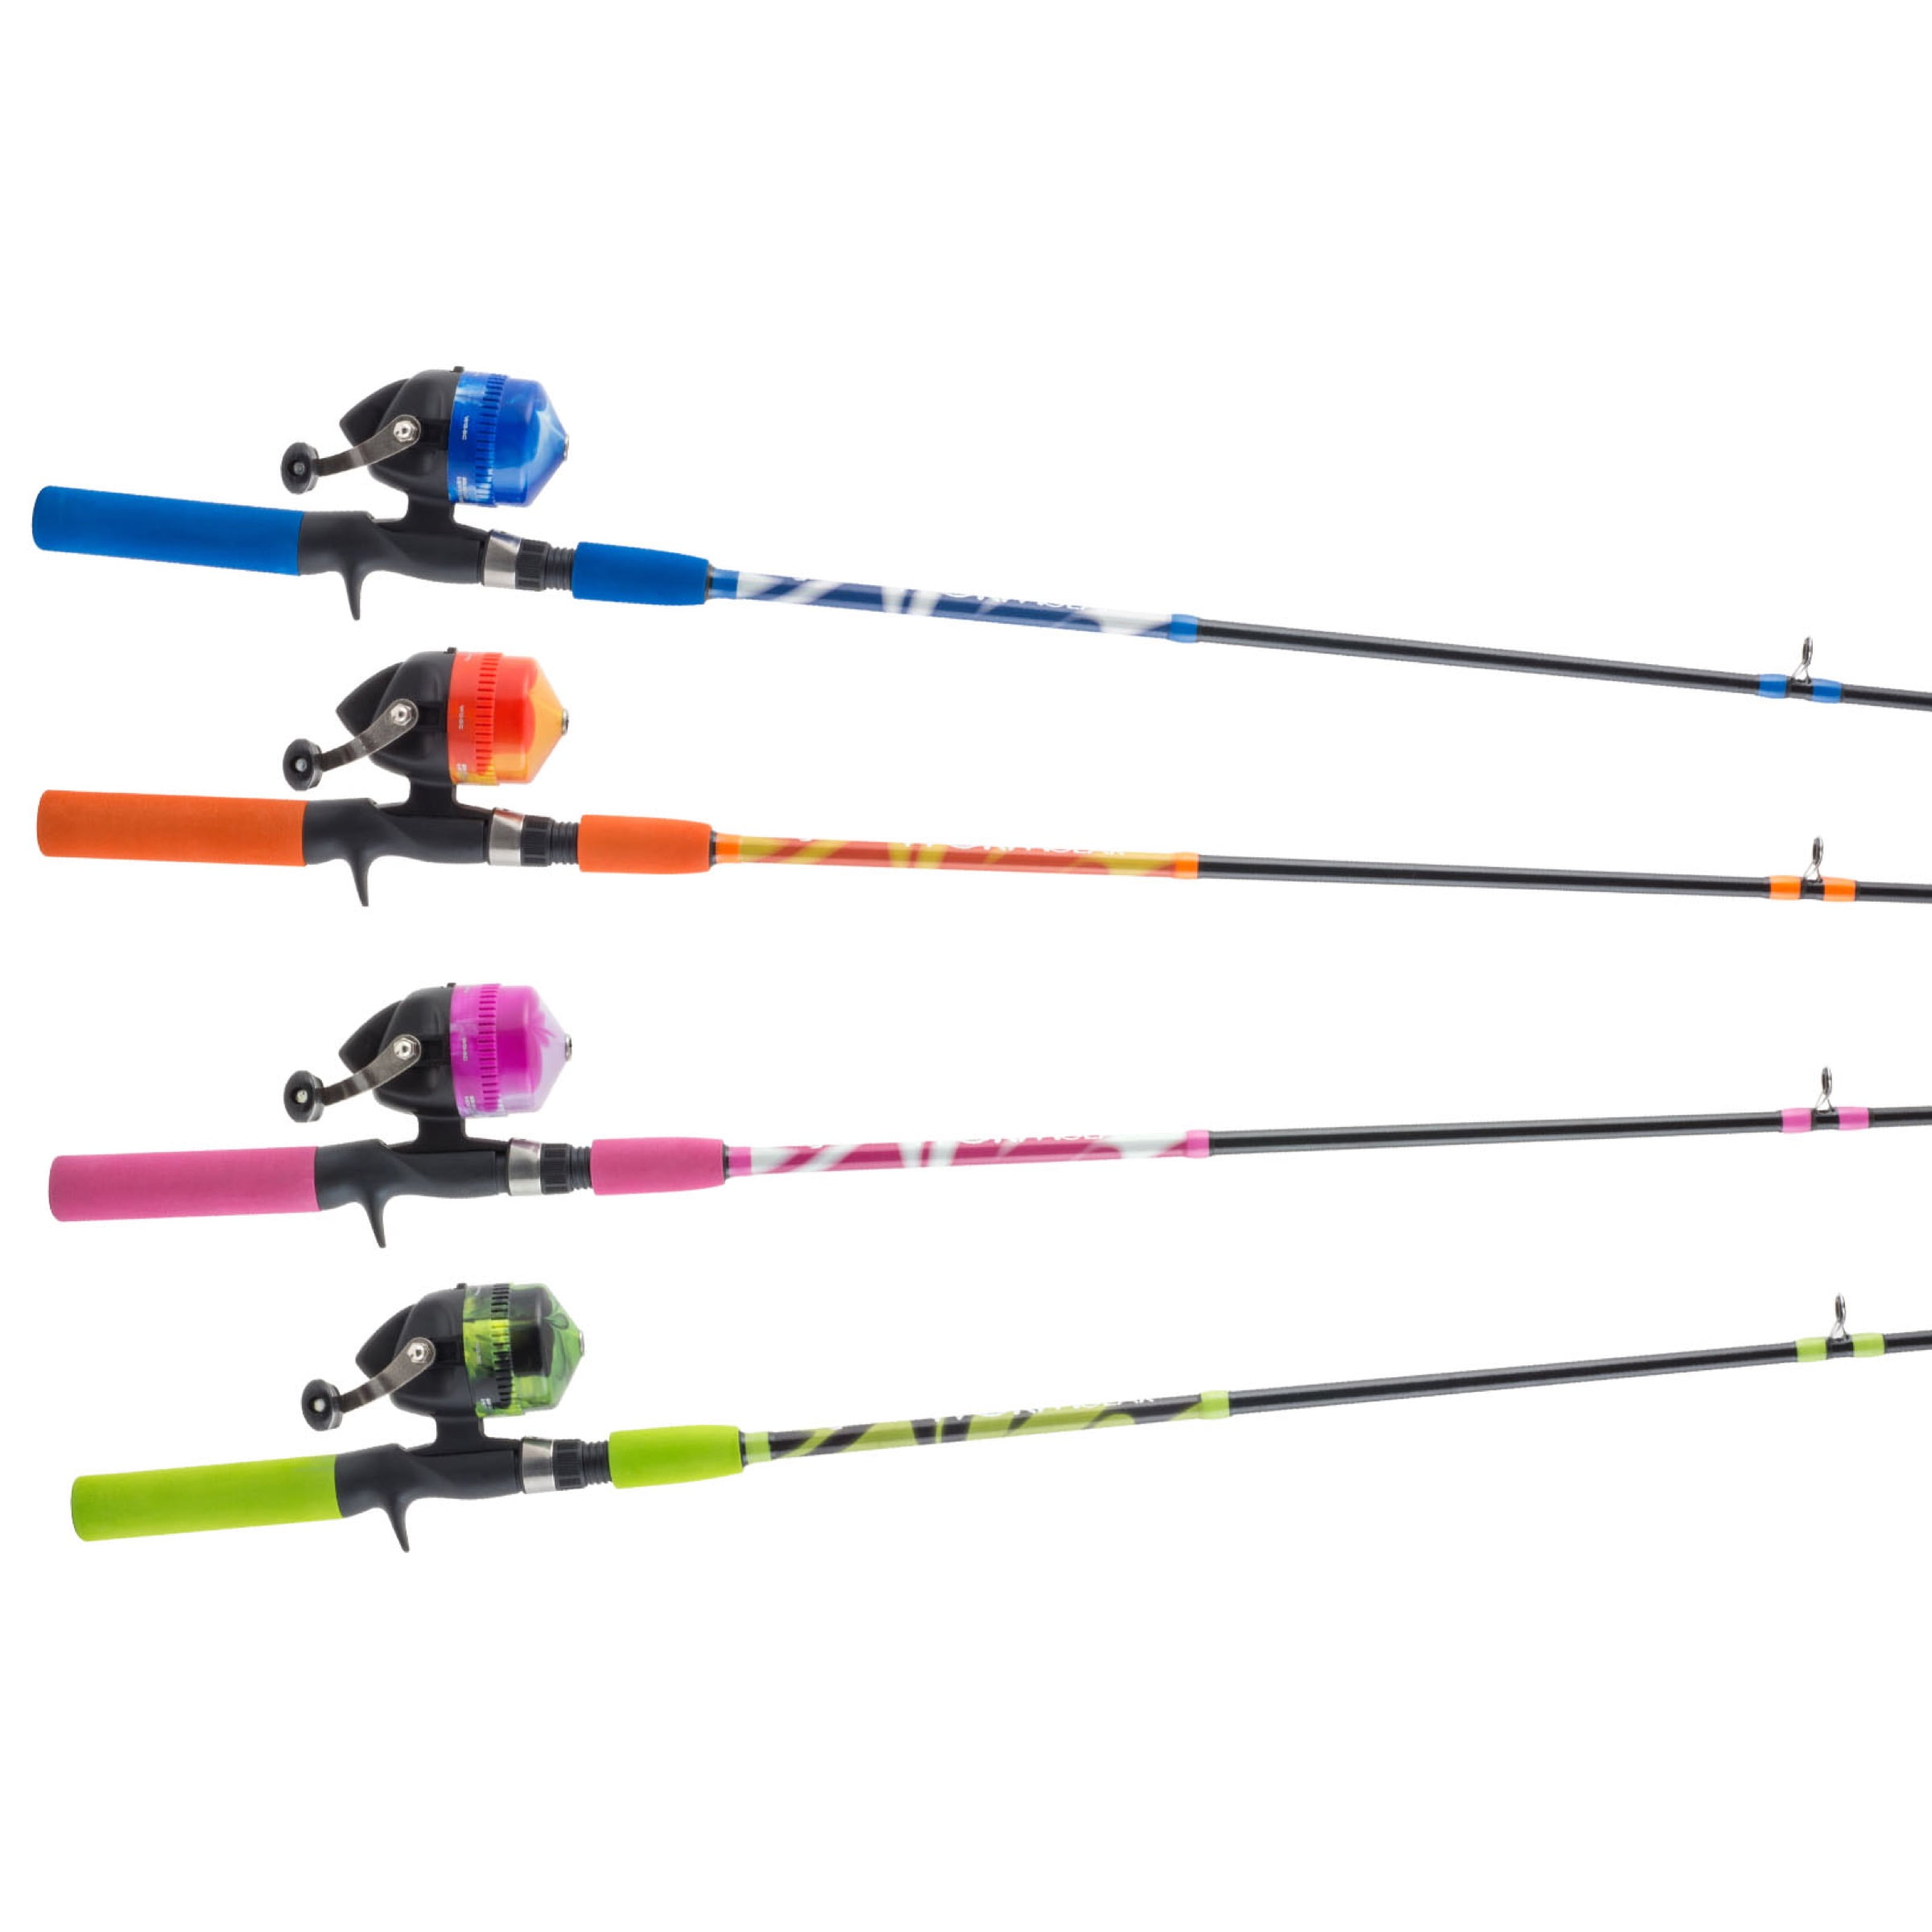  BLISSWILL Fishing Gear Fishing Rod and Reel Combos